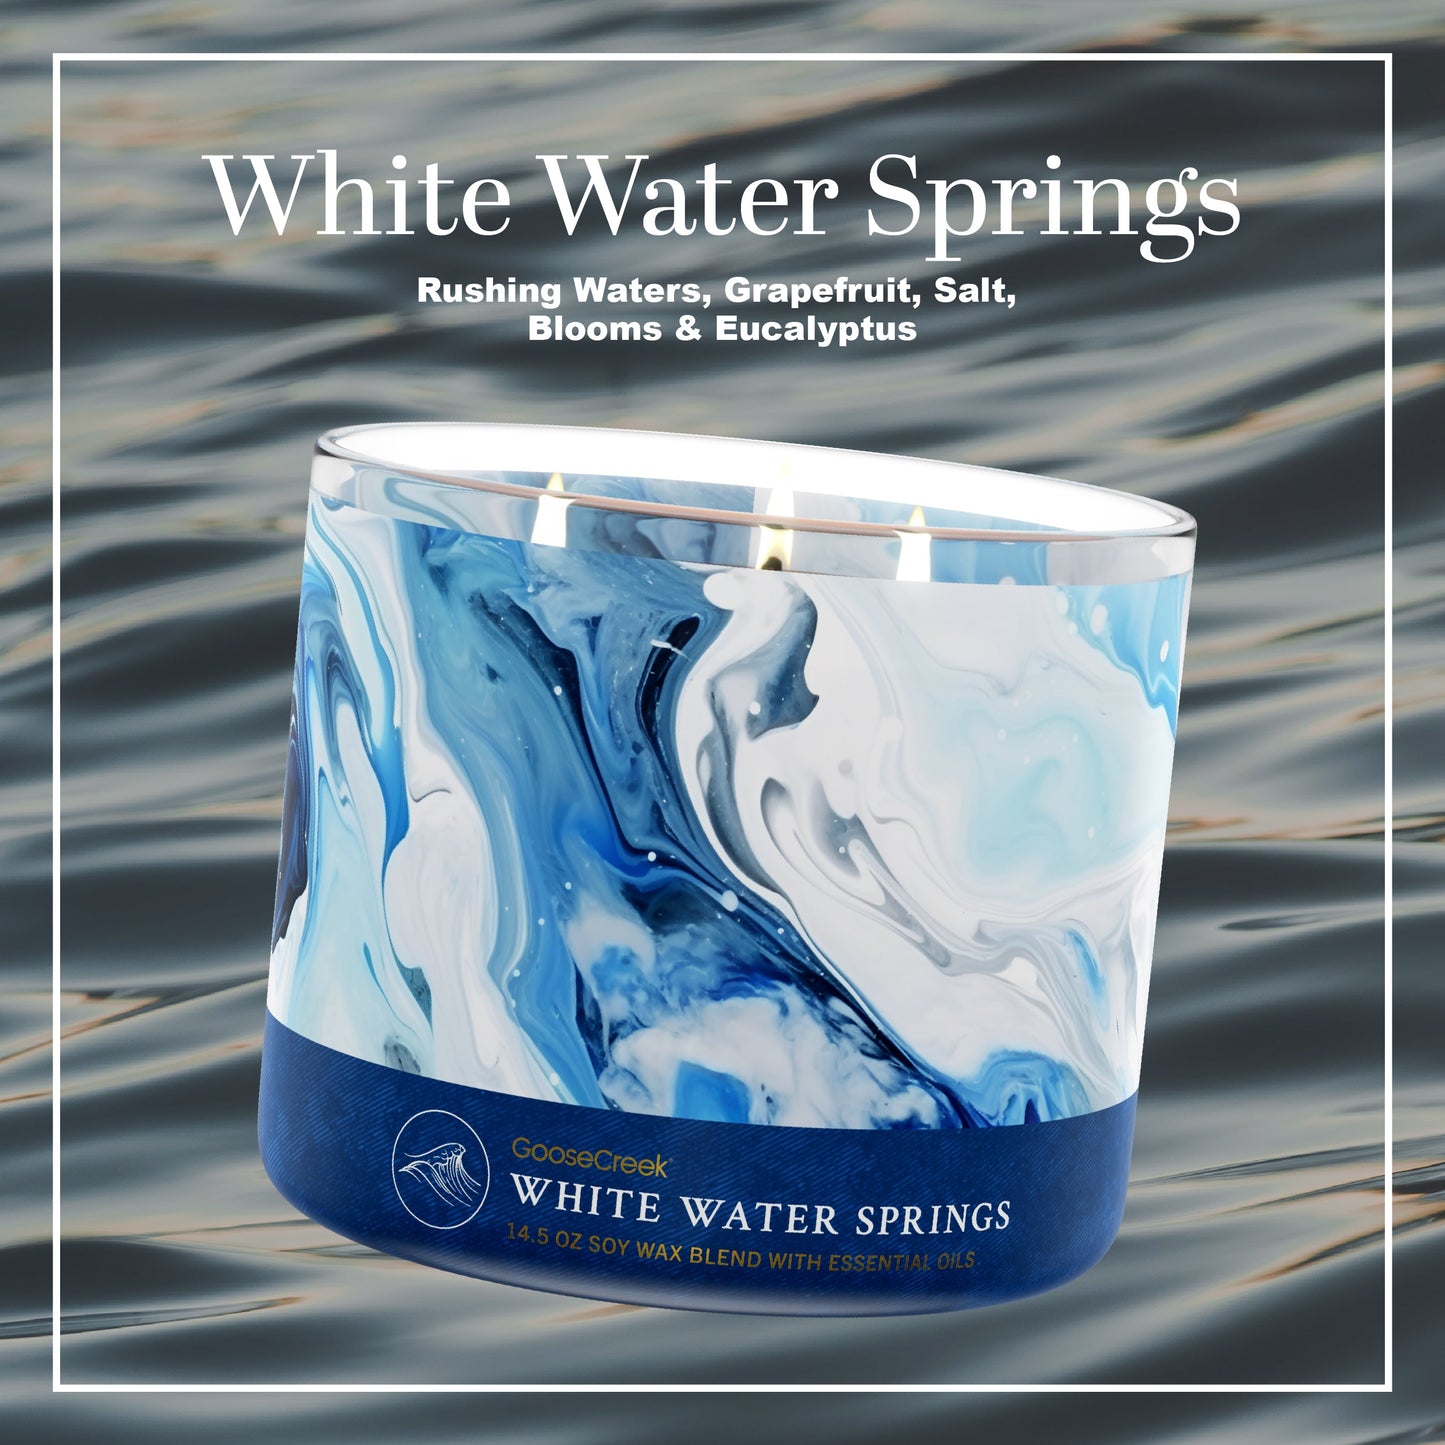 White Water Springs Large 3-Wick Candle